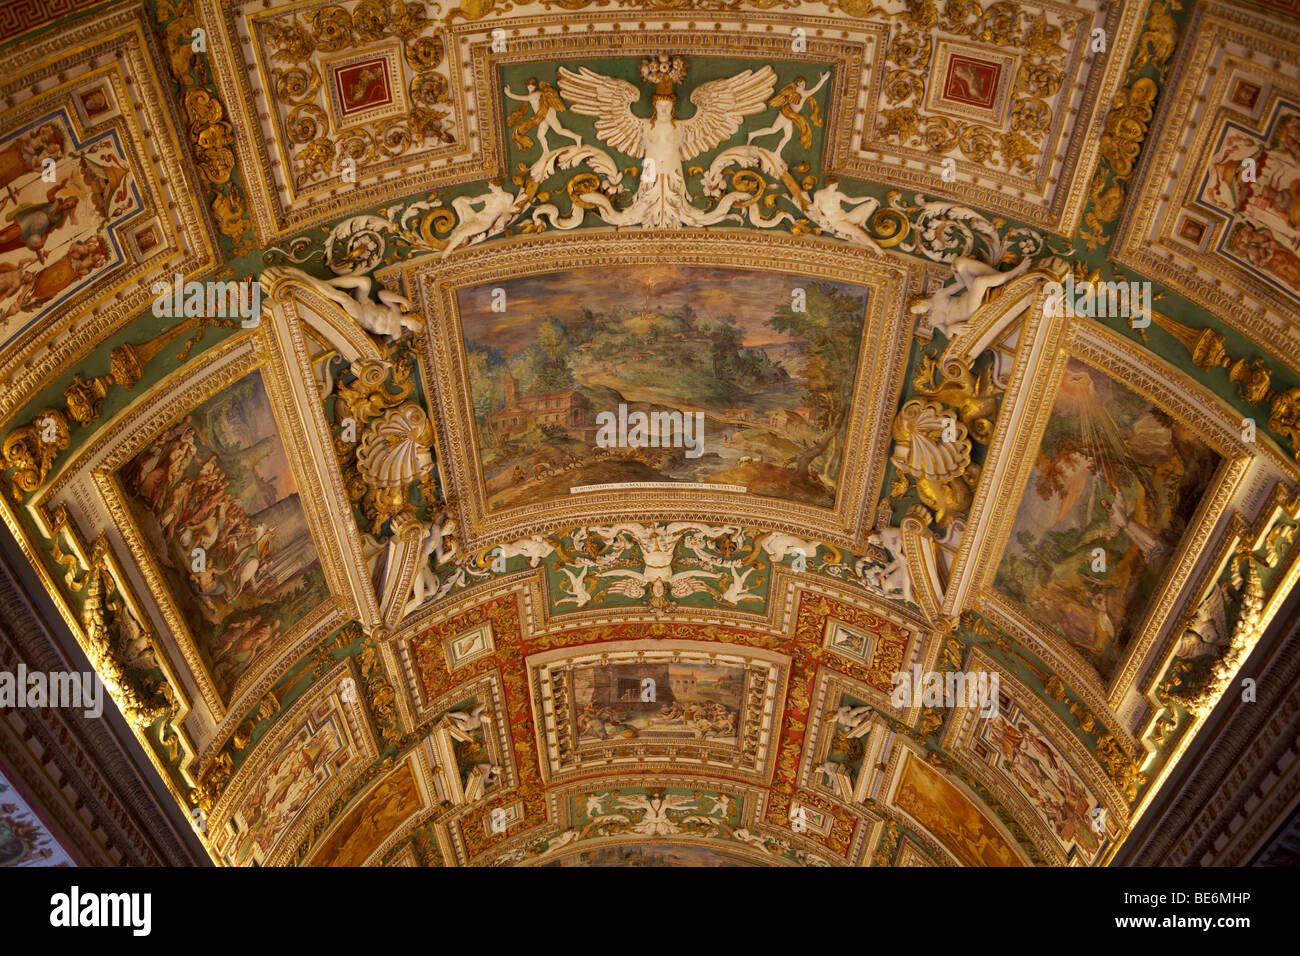 Ceiling Painting In A Corridor Of The Vatican Museums Rome